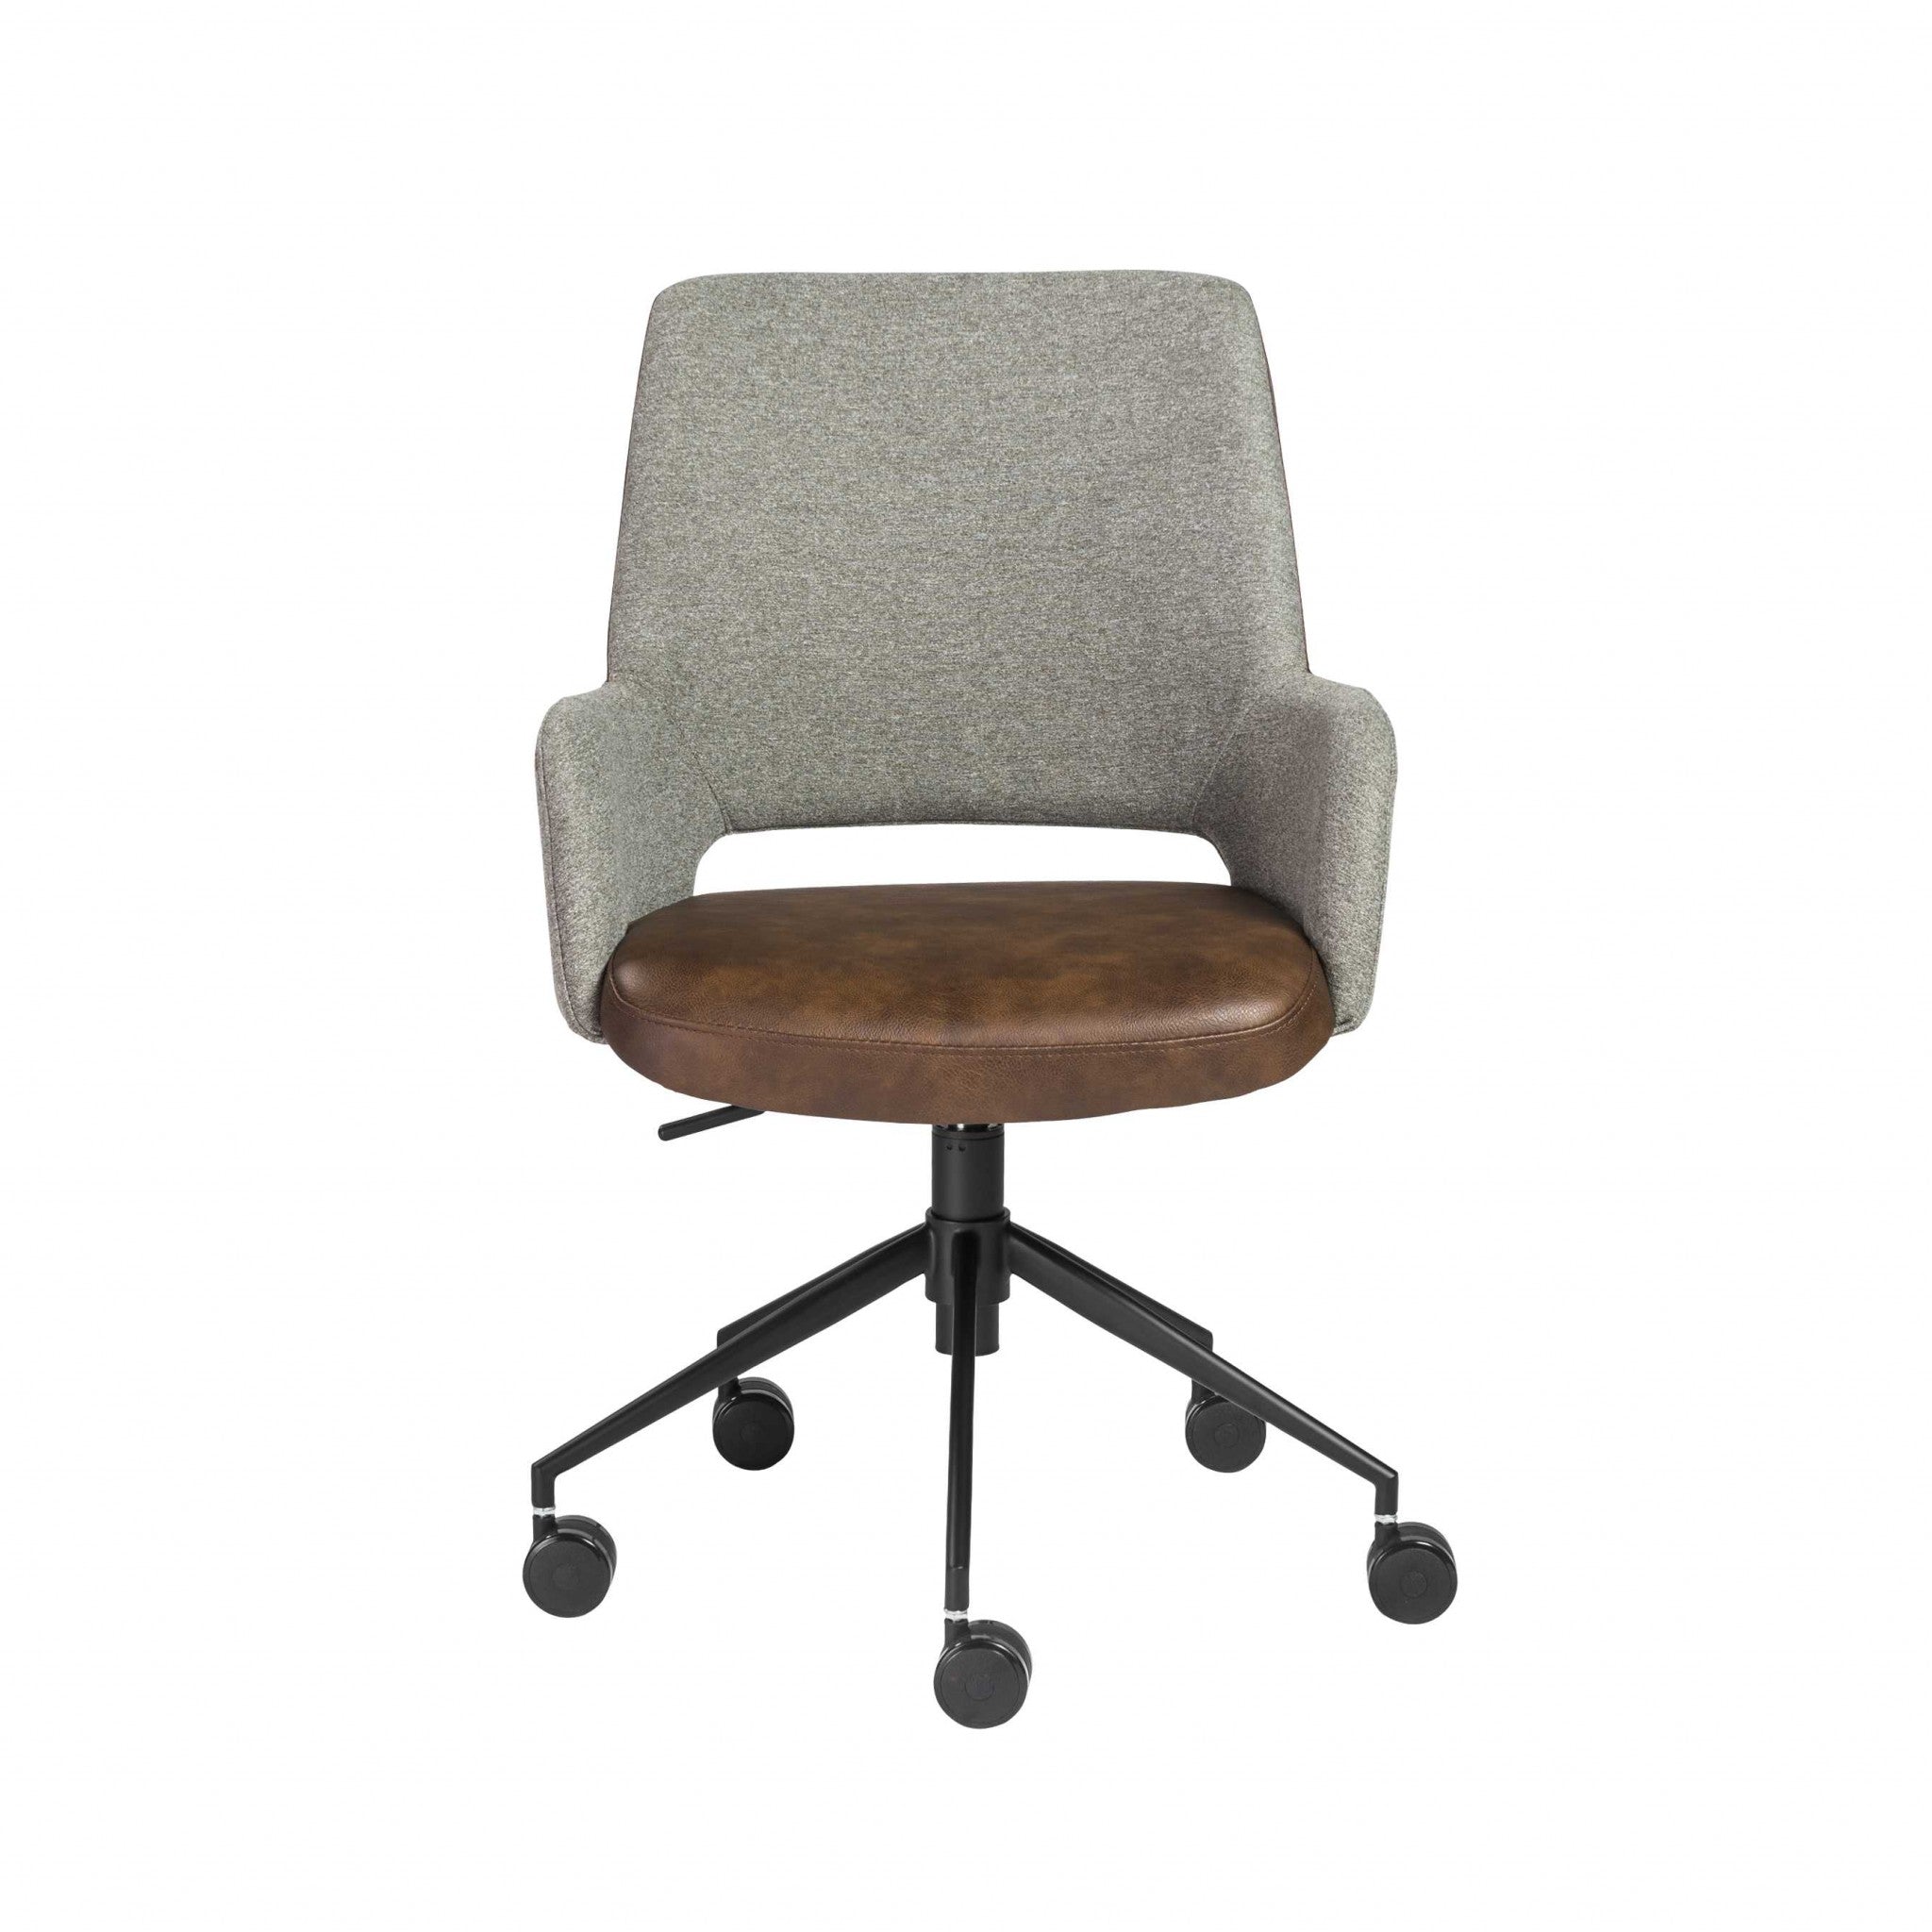 Gray-Linen-Seat-Swivel-Adjustable-Task-Chair-Fabric-Back-Steel-Frame-Office-Chairs